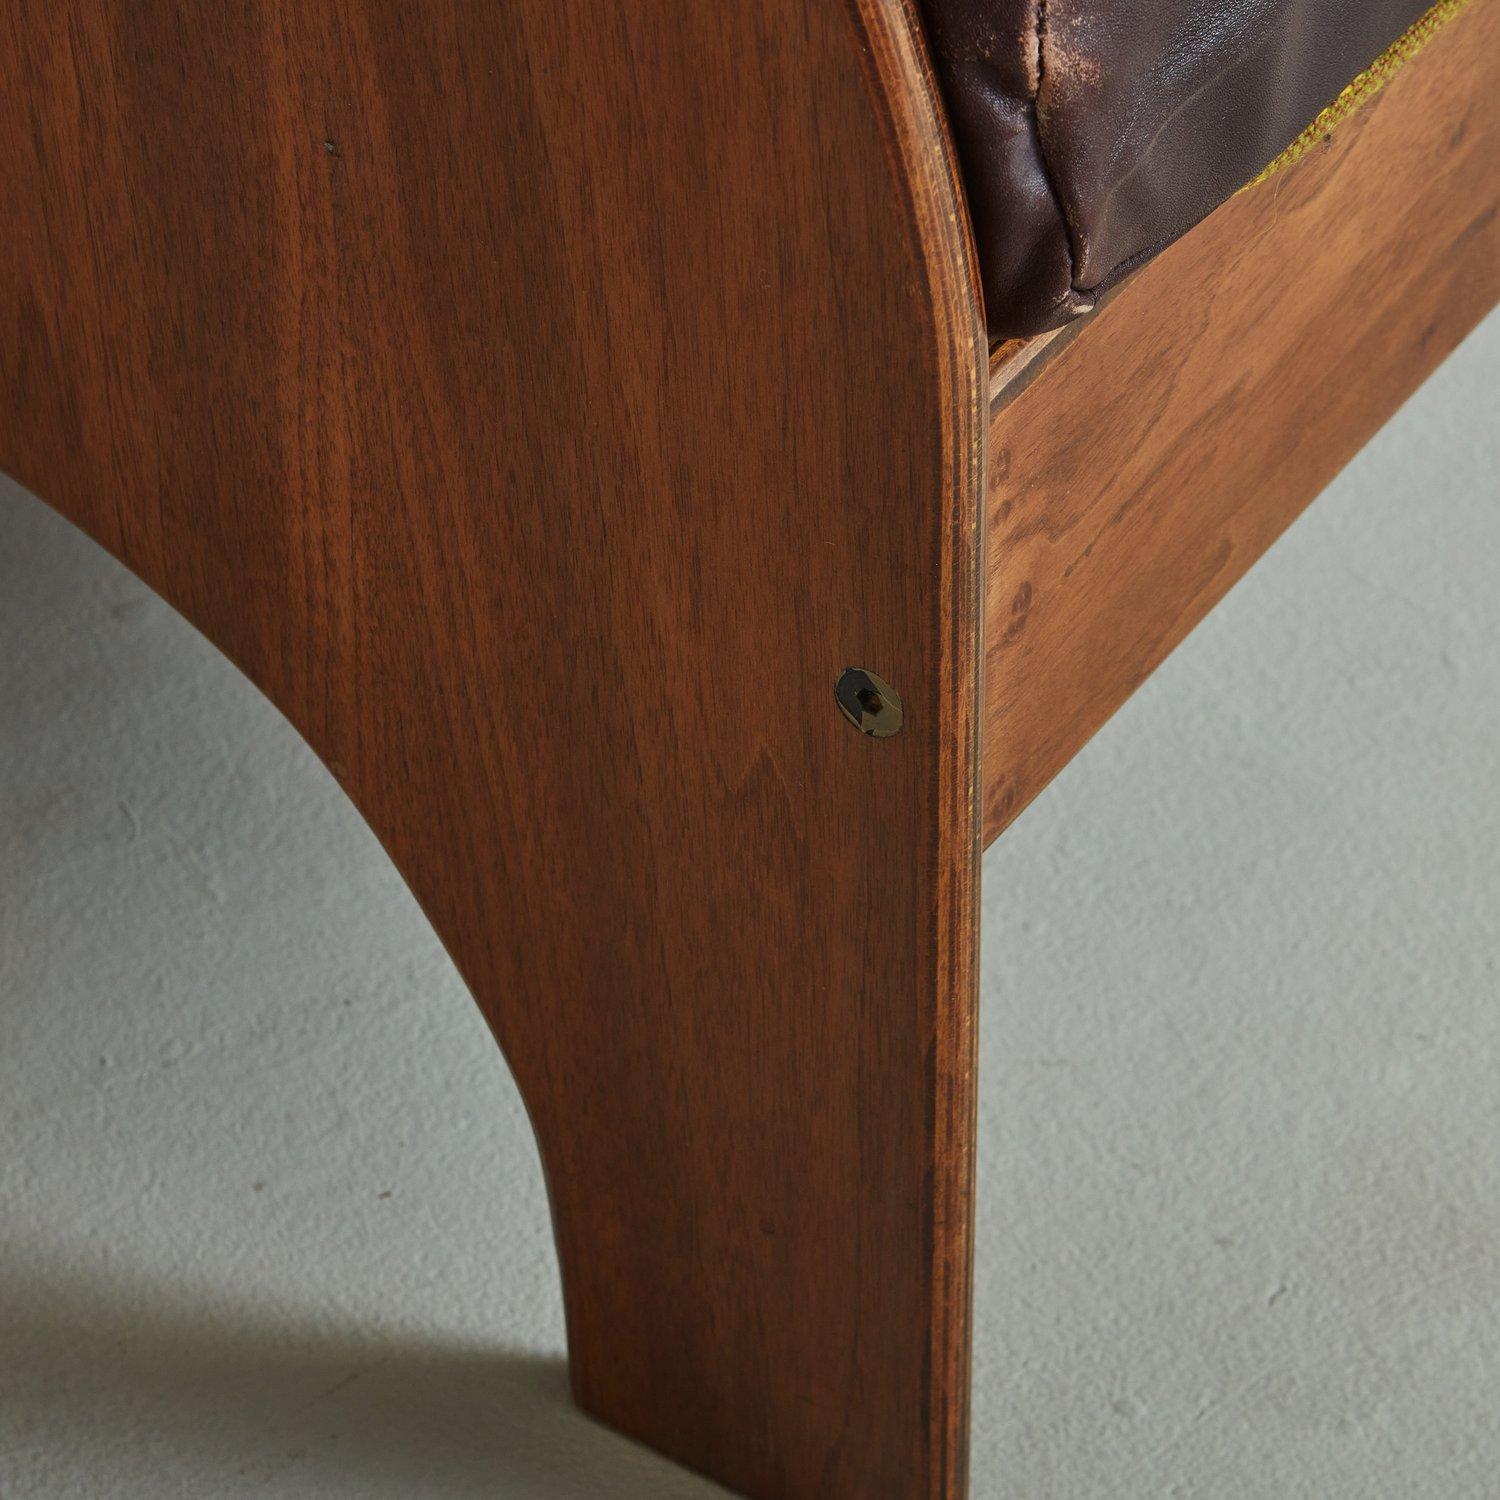 Walnut + Leather 'Arcata' Chair by Gae Aulenti for Poltronova, Italy 1968 For Sale 2